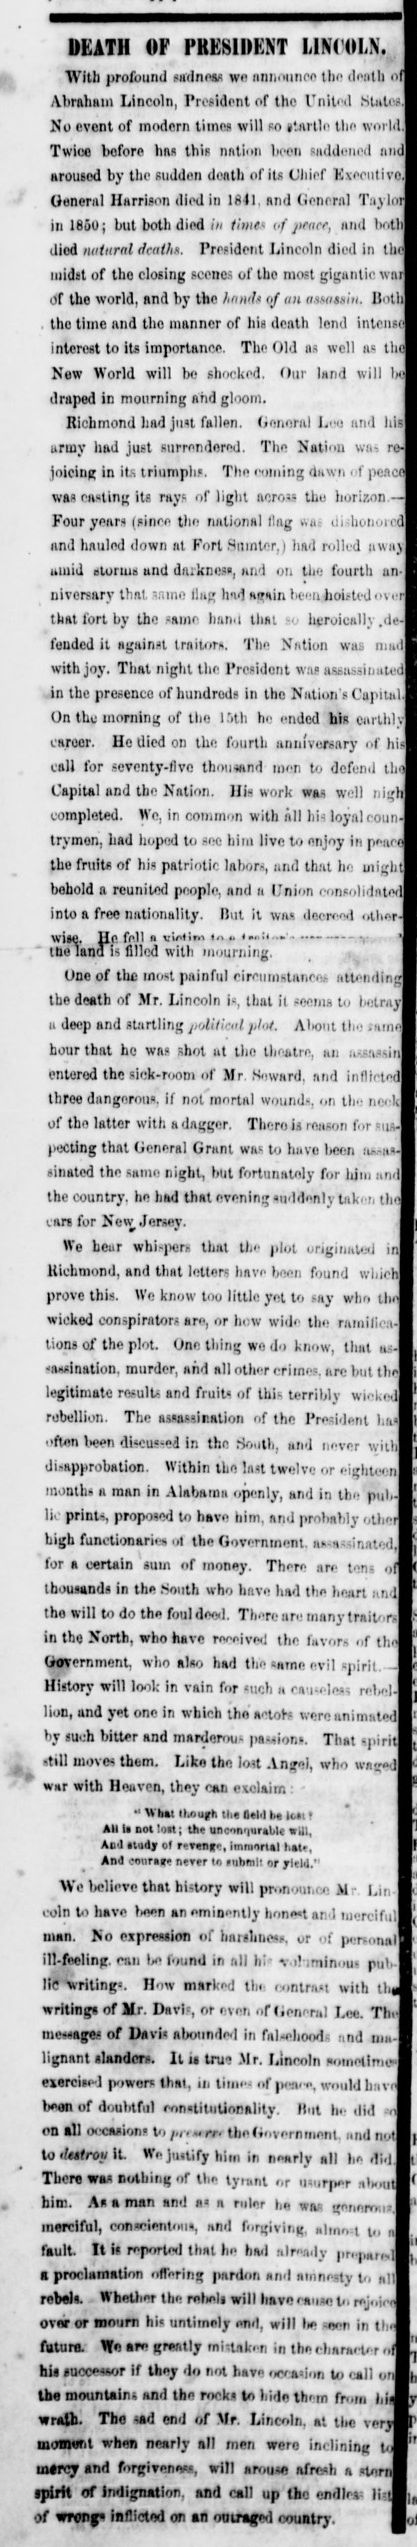 Lincoln Assassination Brownlow's Knoxville Whig and Rebel Ventilator article